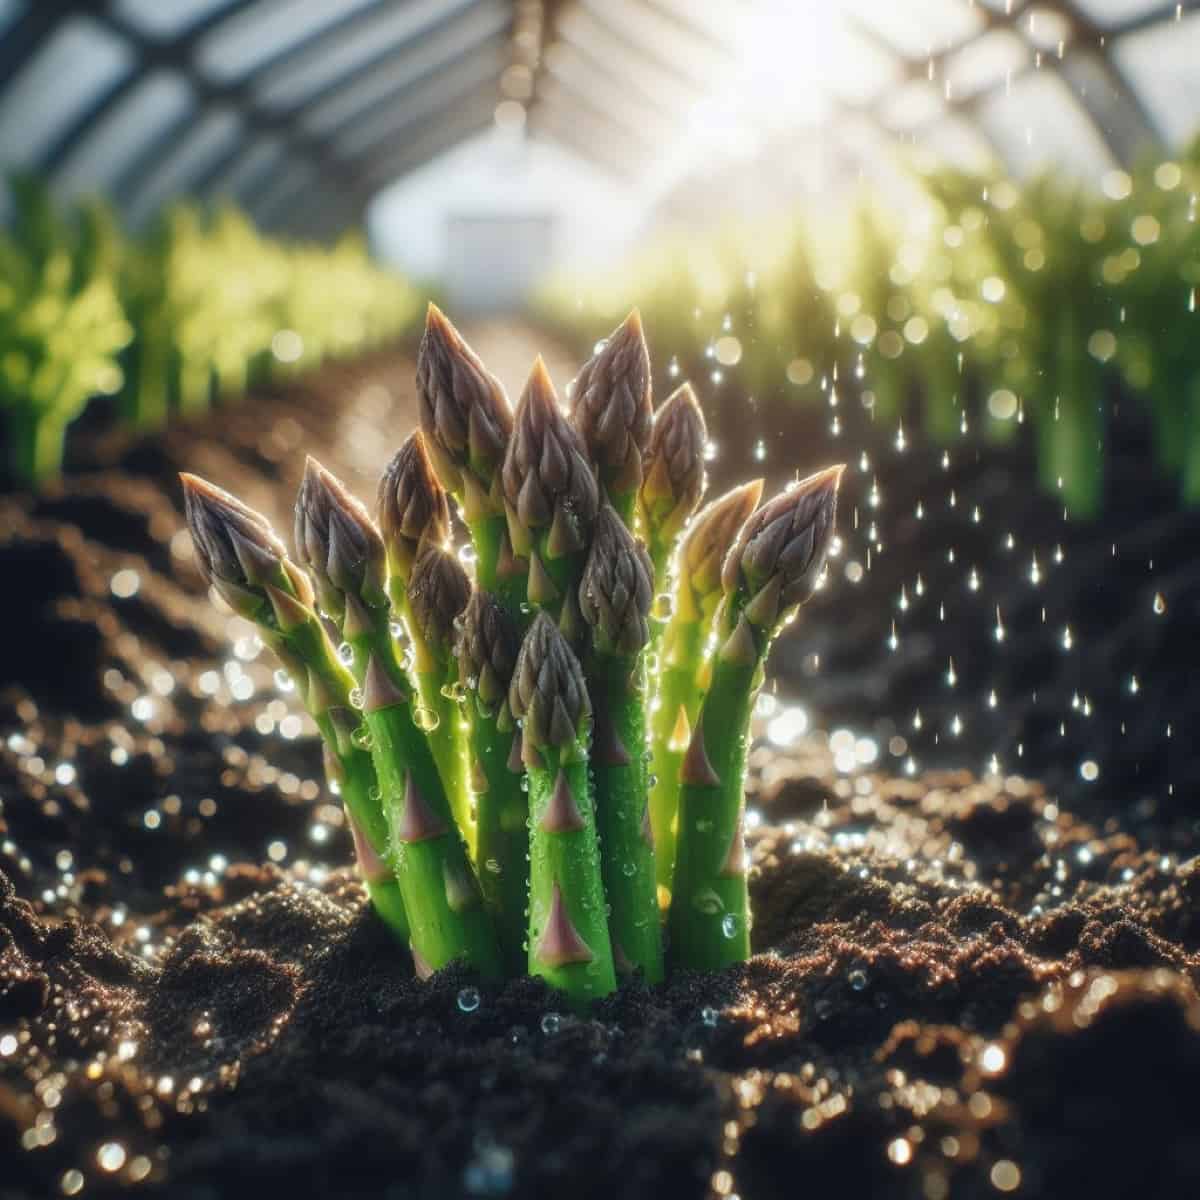 Asparagus in Greenhouses